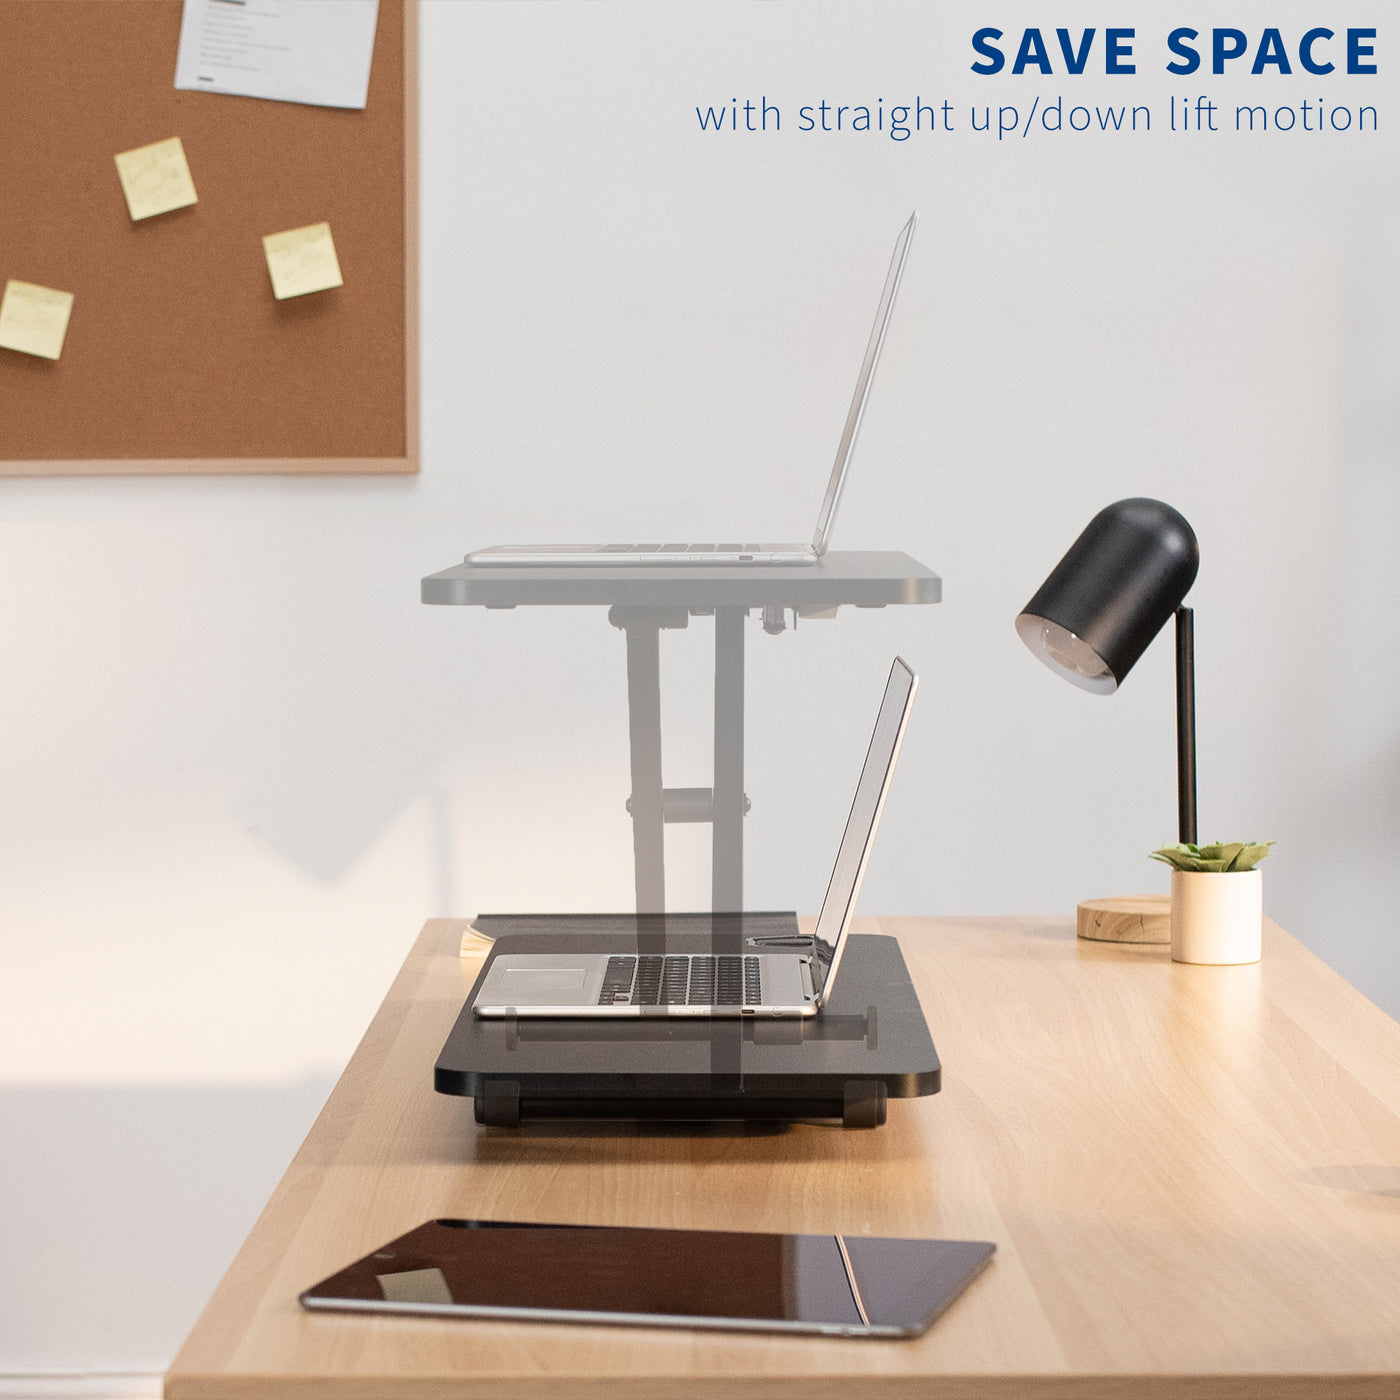 Ergonomically advance your workspace while maximizing current desk space with vertical movements of the desk converter.